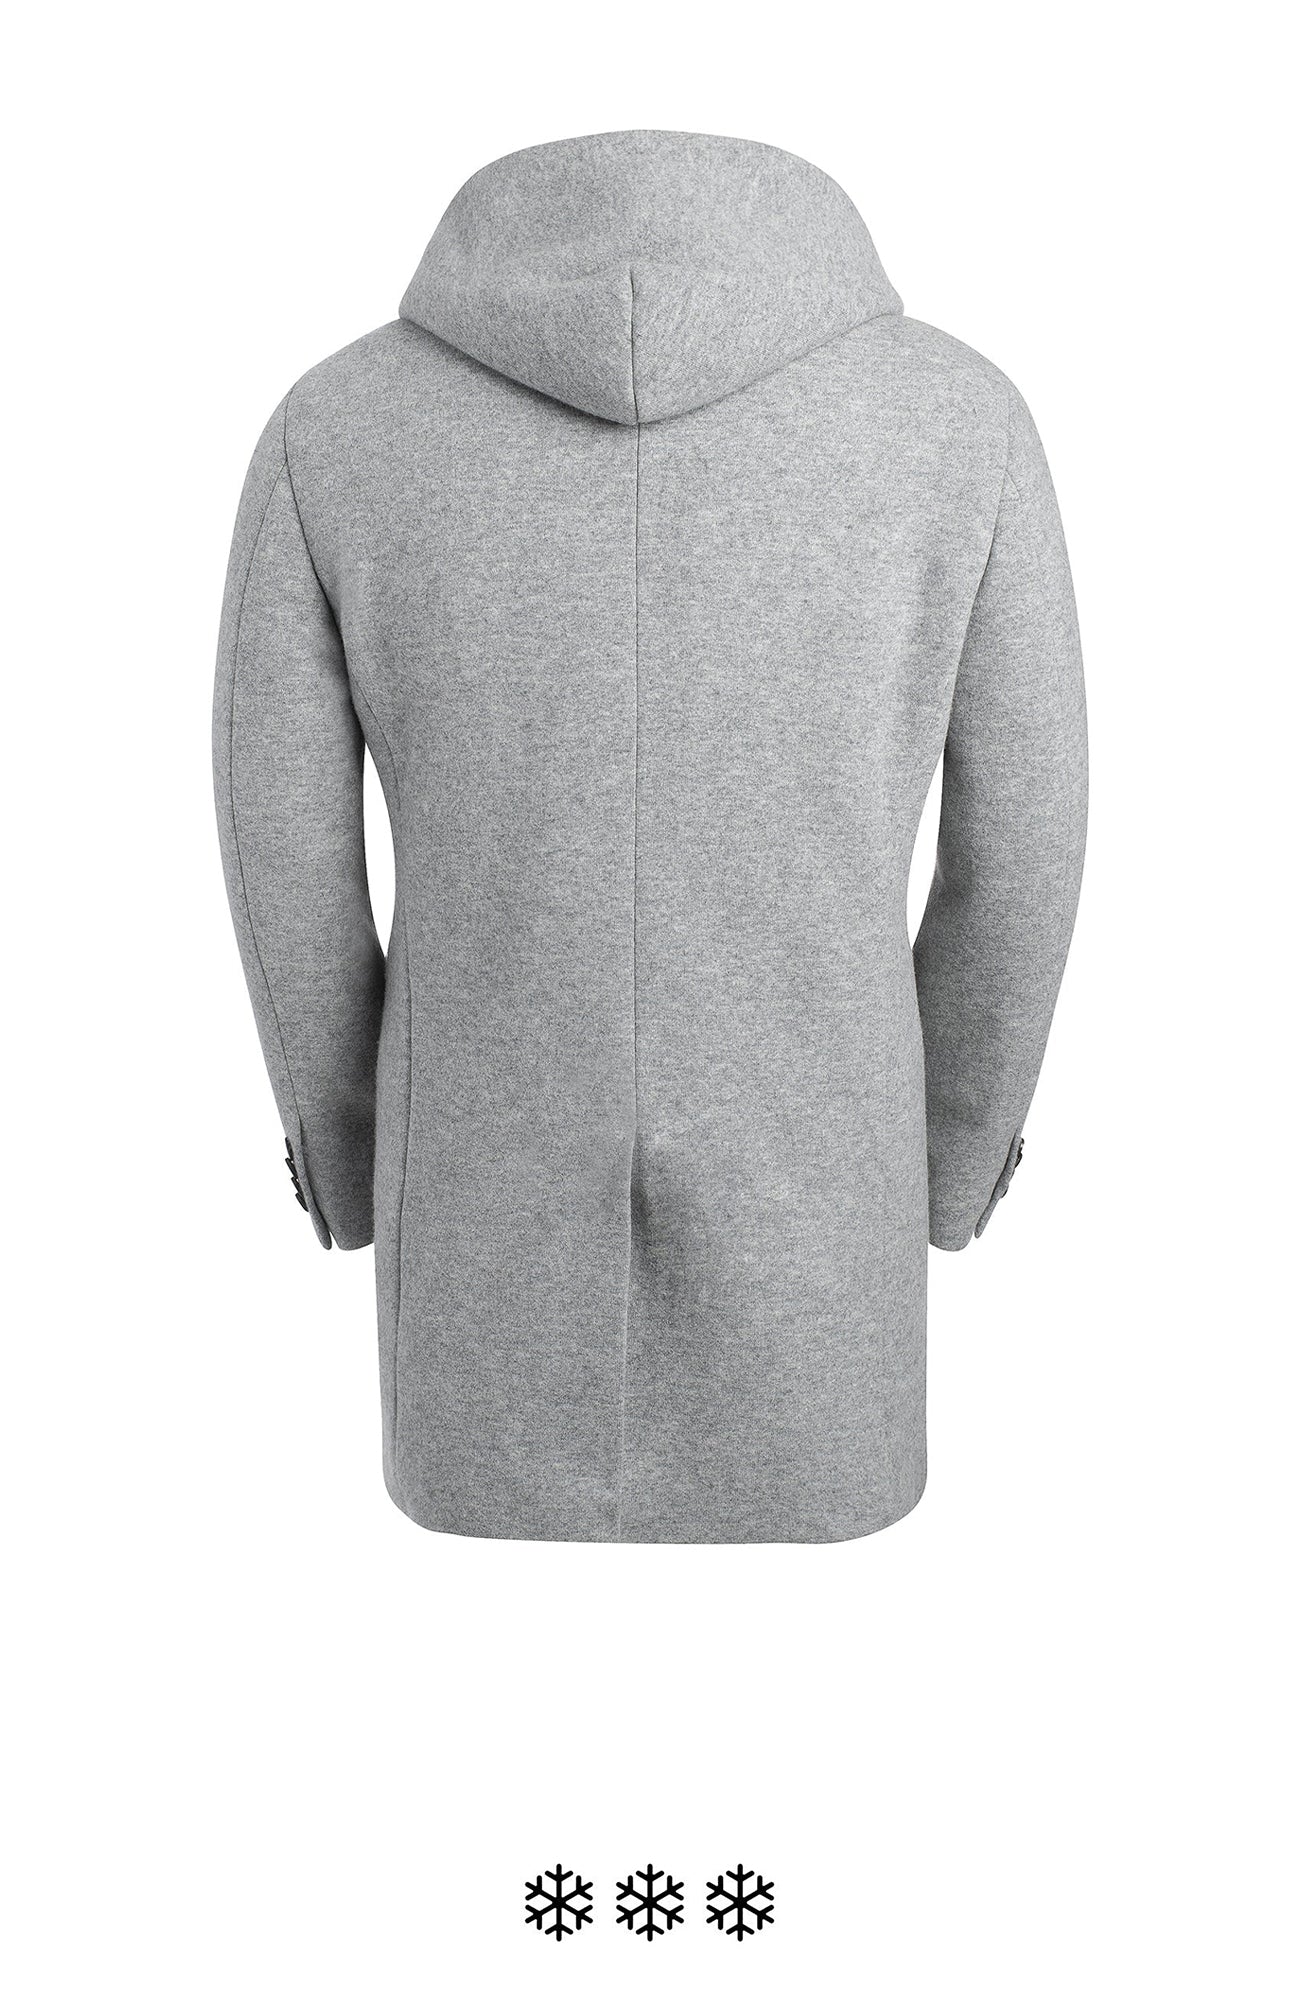  Tyson grey wool top coat 36 inch length with primaloft lining